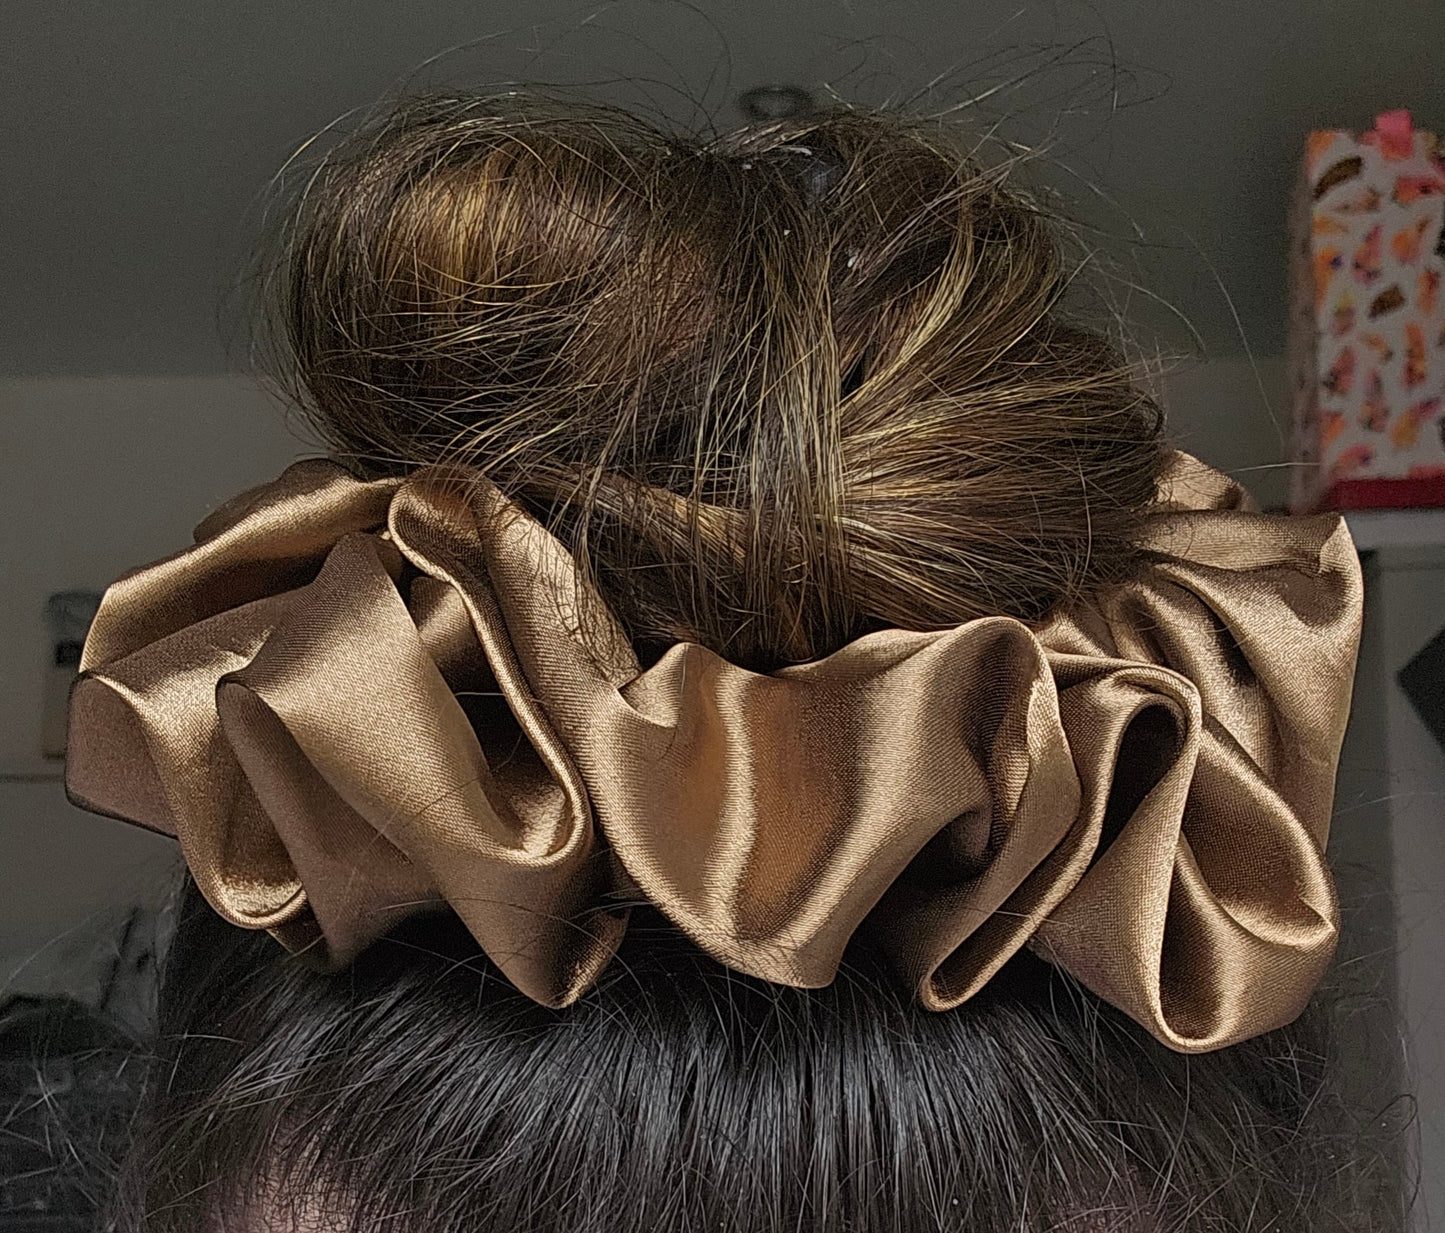 OBC Personalised XL hair scrunchies!